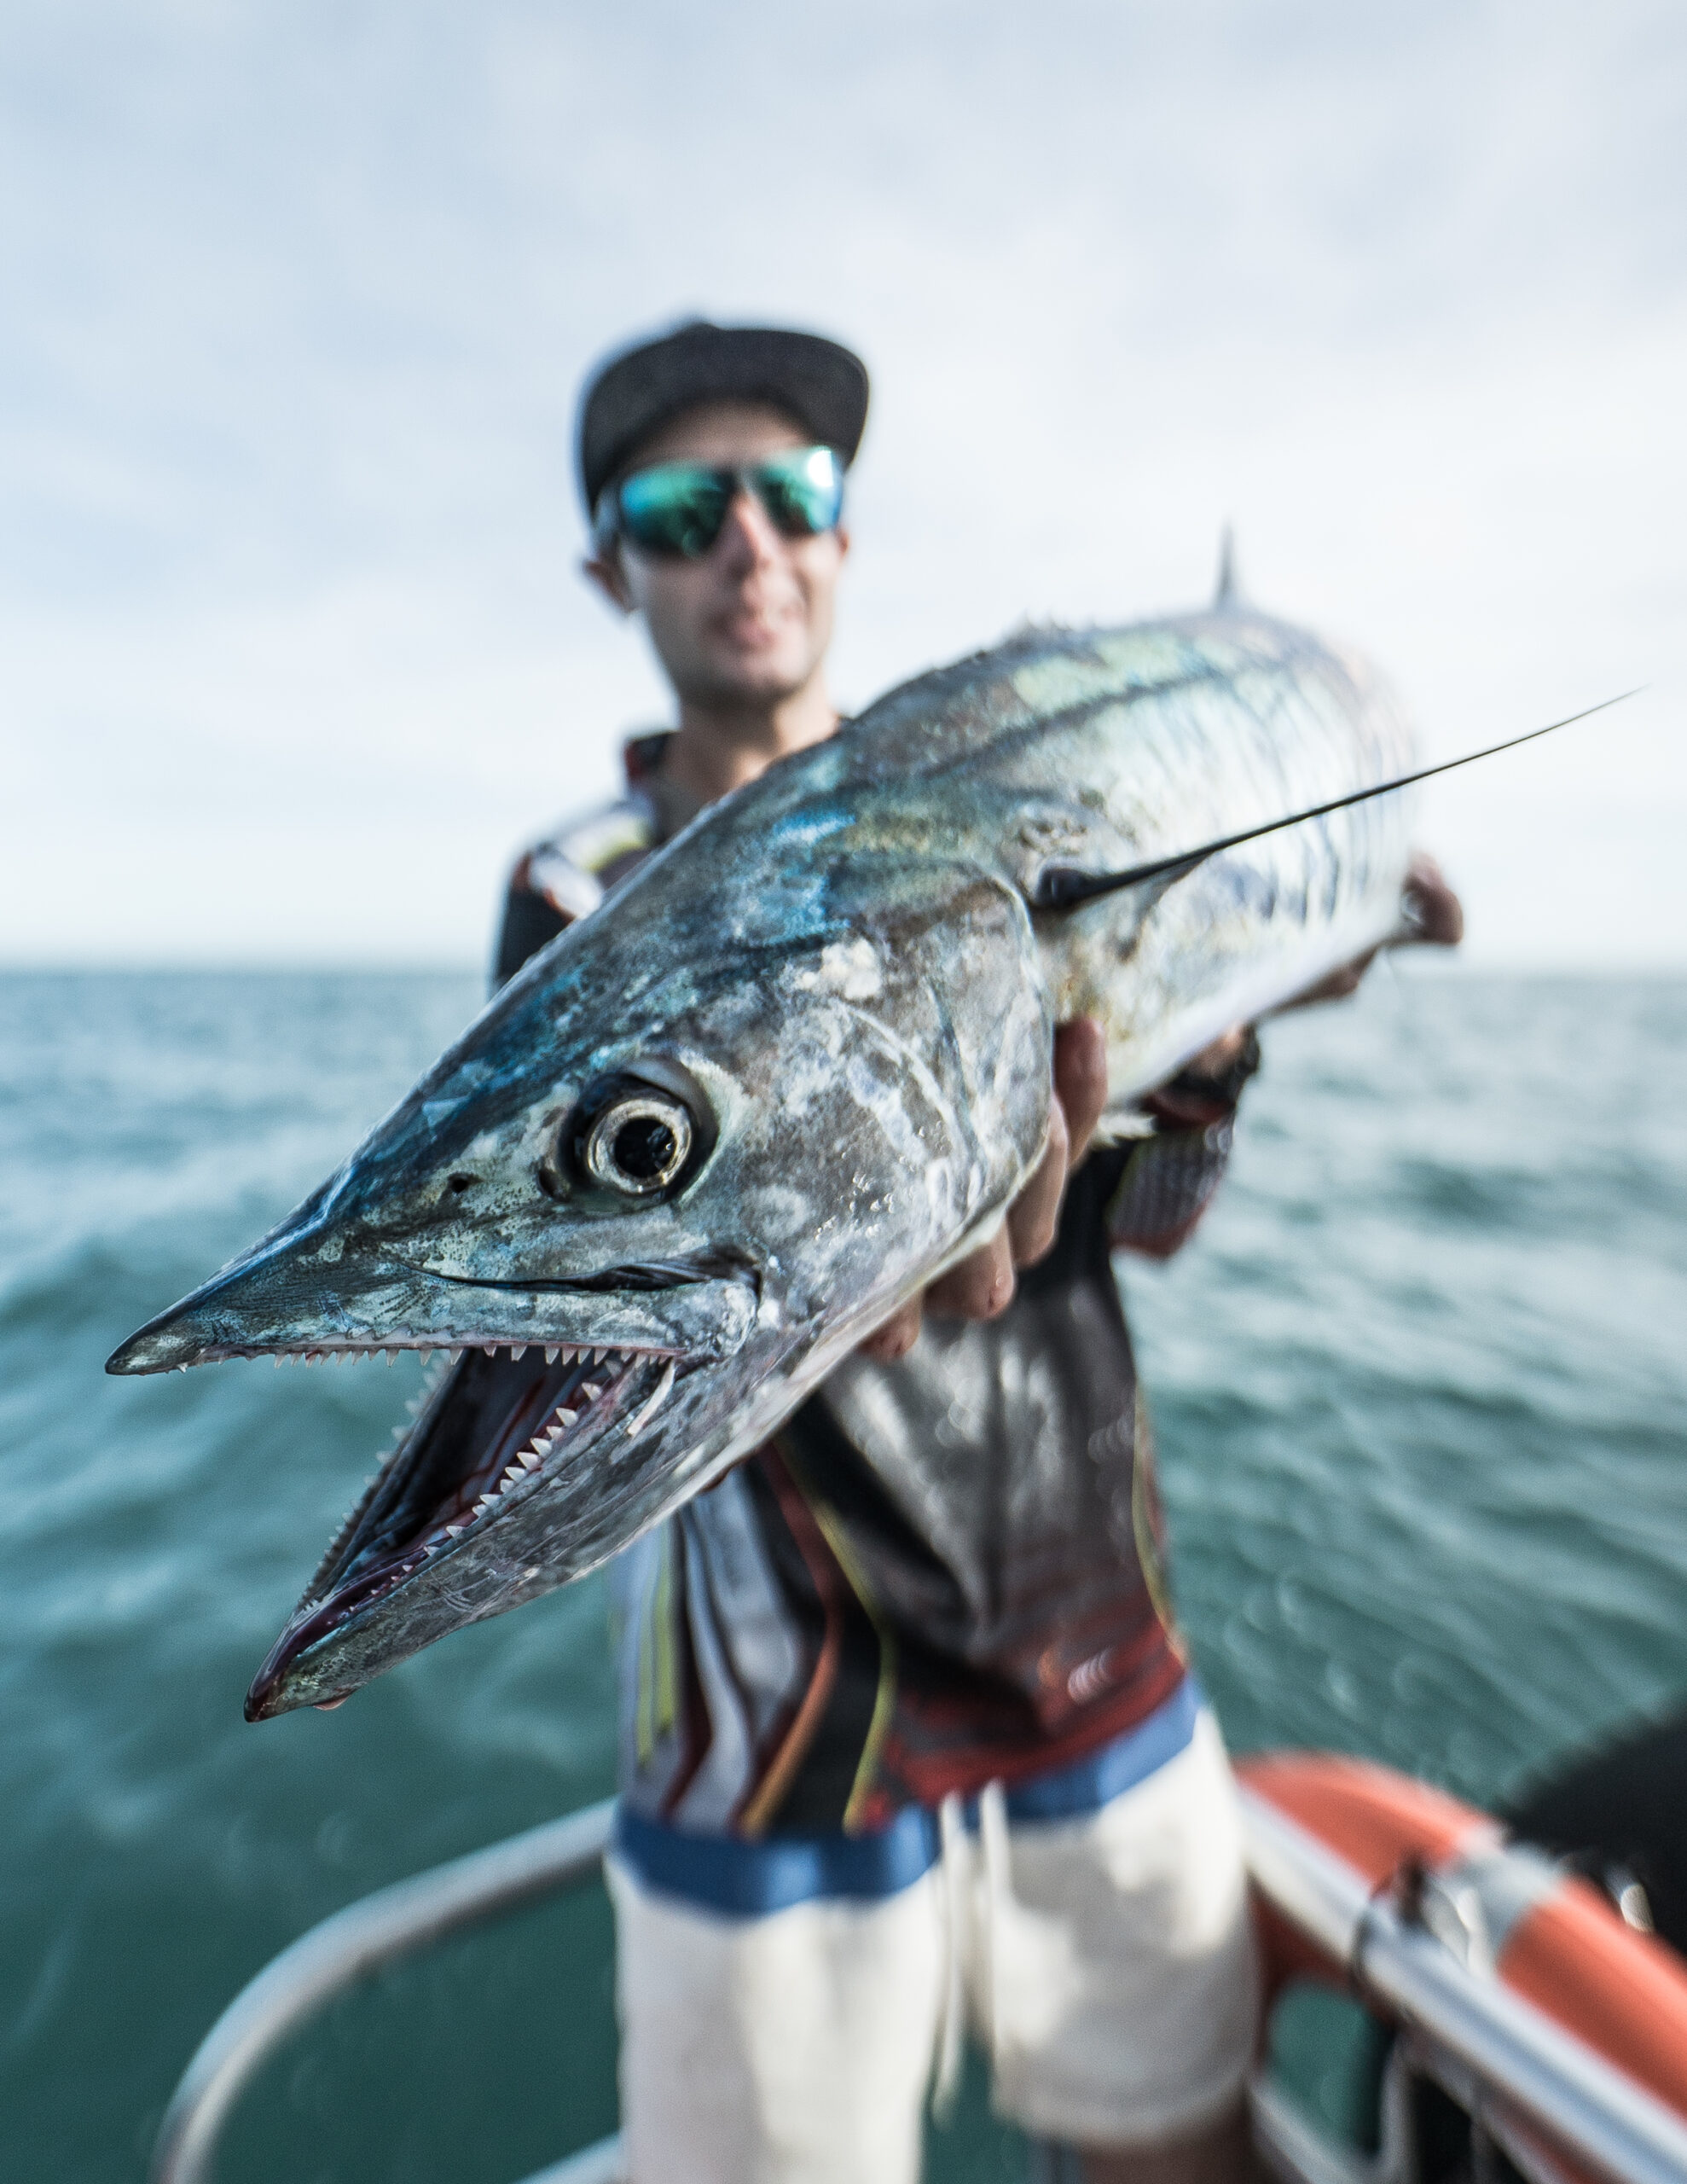 Full Day Fishing Charter - Dundee